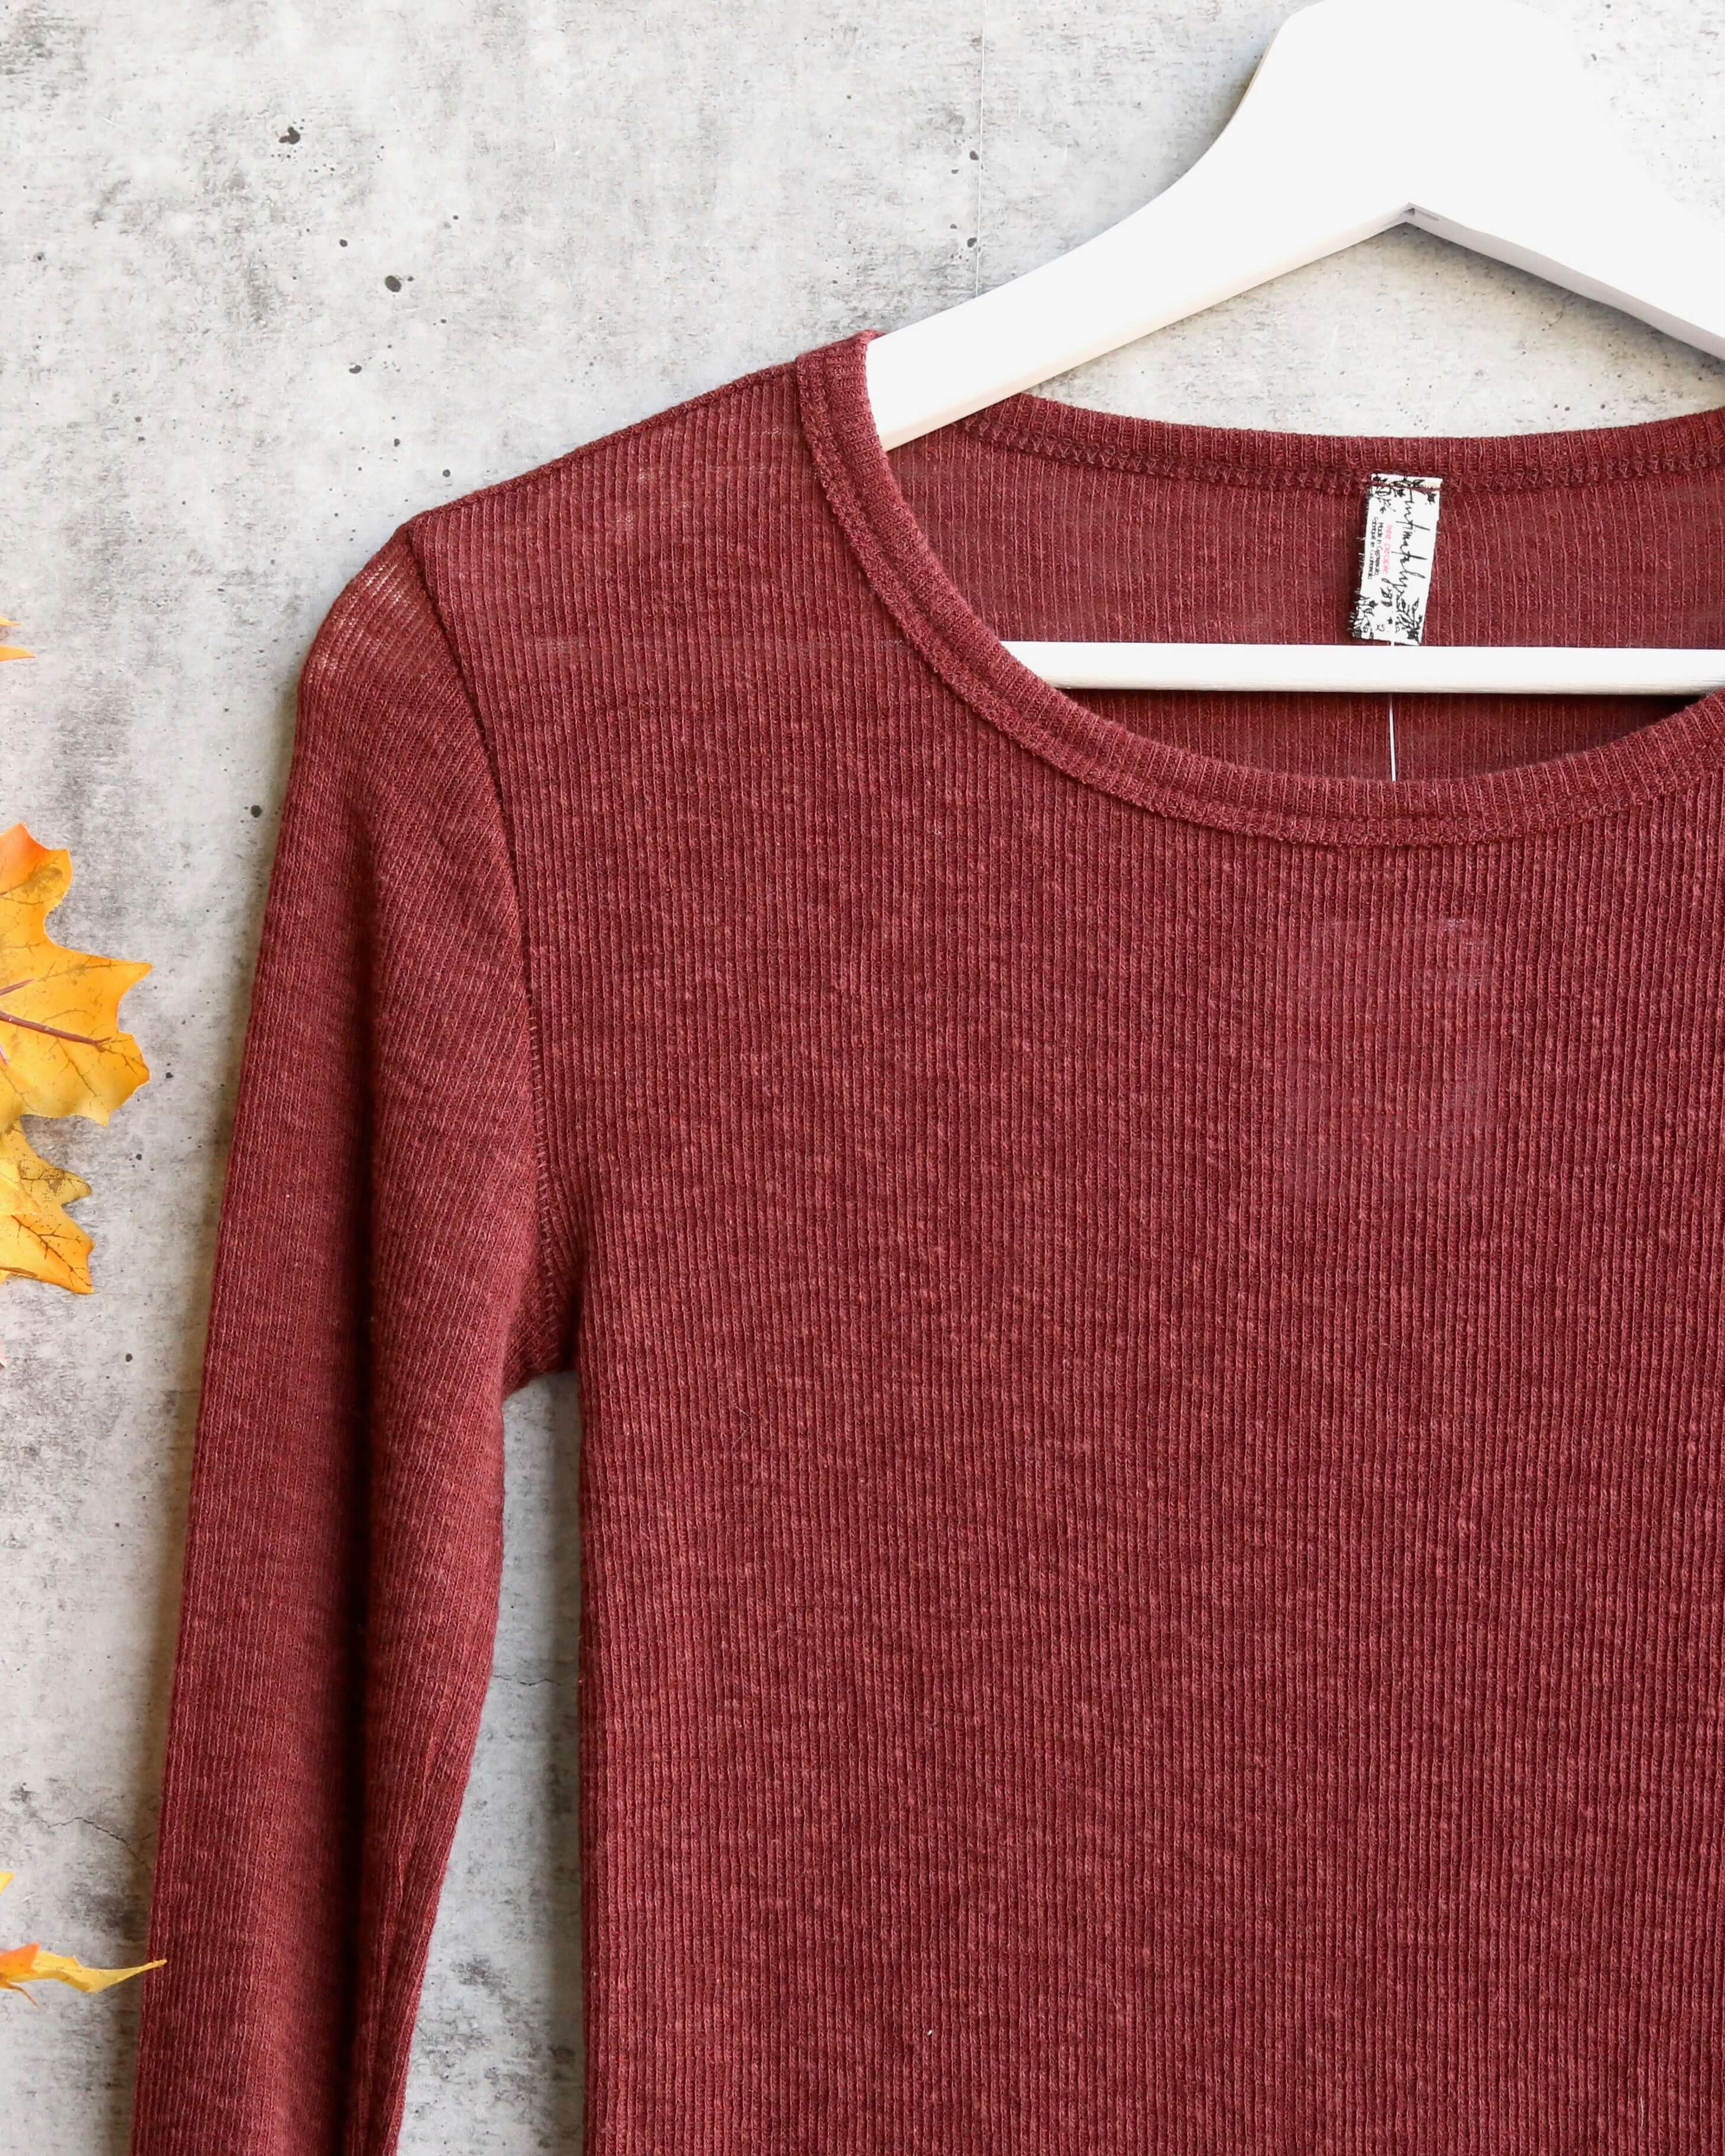 Free People Boundary Long Sleeve Layering Tee - chestnut – Shop Hearts